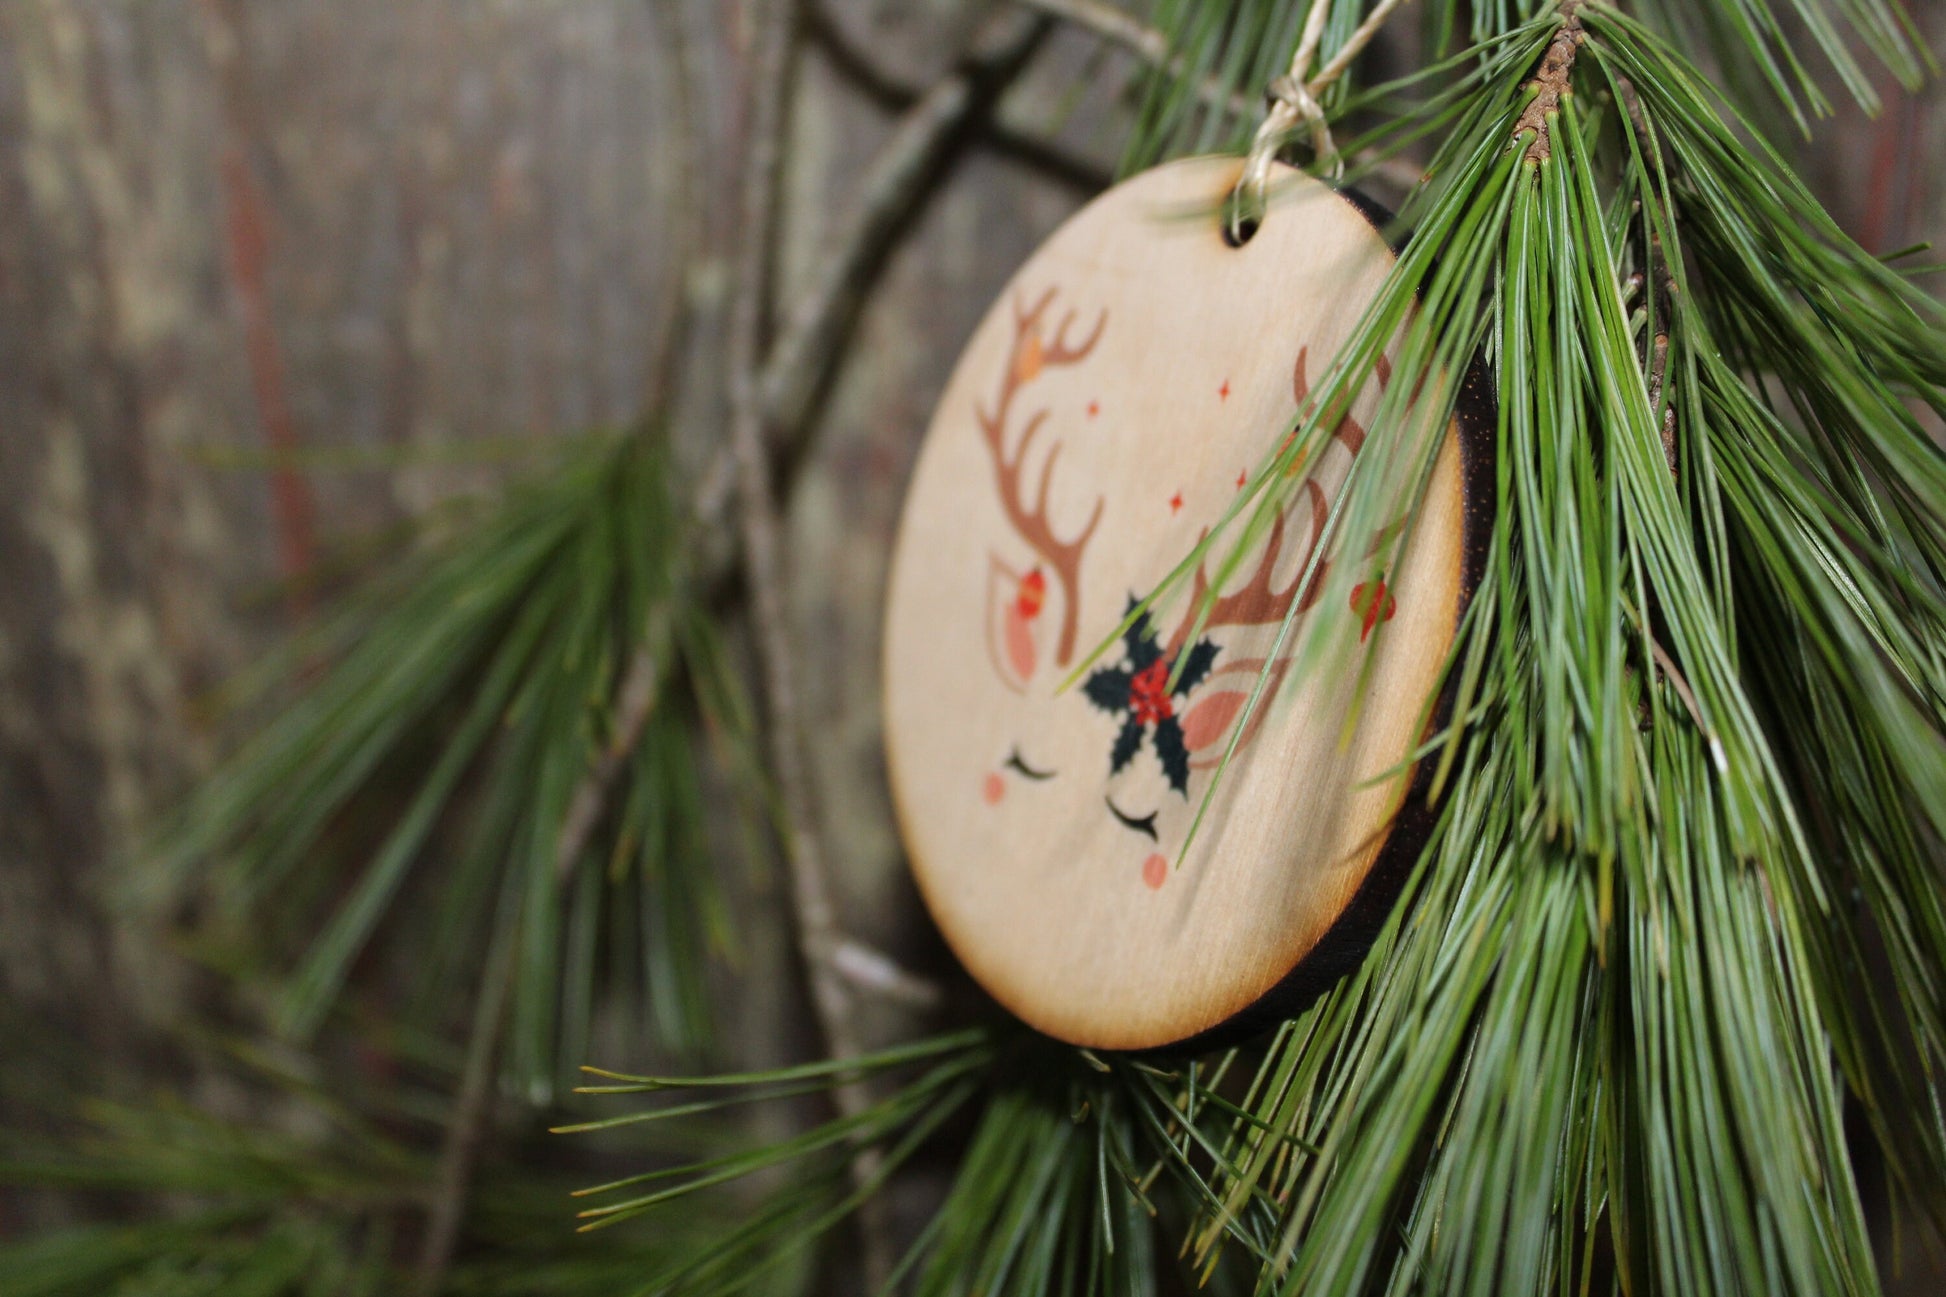 Set of 3 Unicorn Face Ornament Reindeer Antlers Wood Slice Poinsettia Horn Eyelashes Up-close Primitive Christmas Ornament Rustic Tree Print